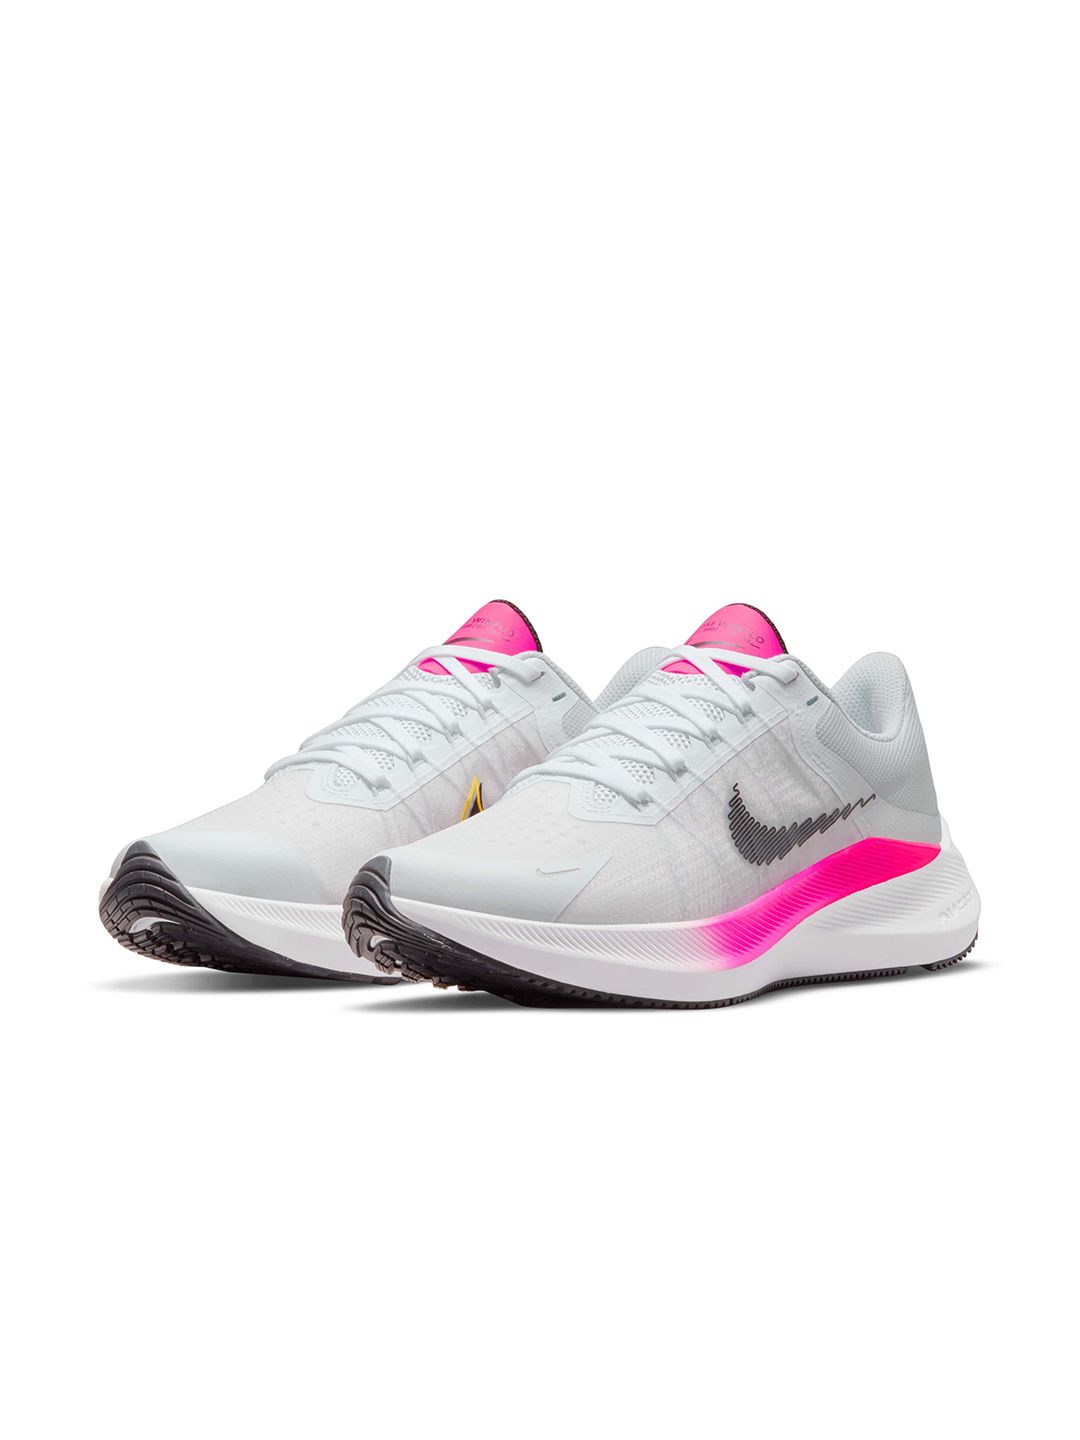 Nike Women White Flywire WINFLO 8 Running Shoes Price in India